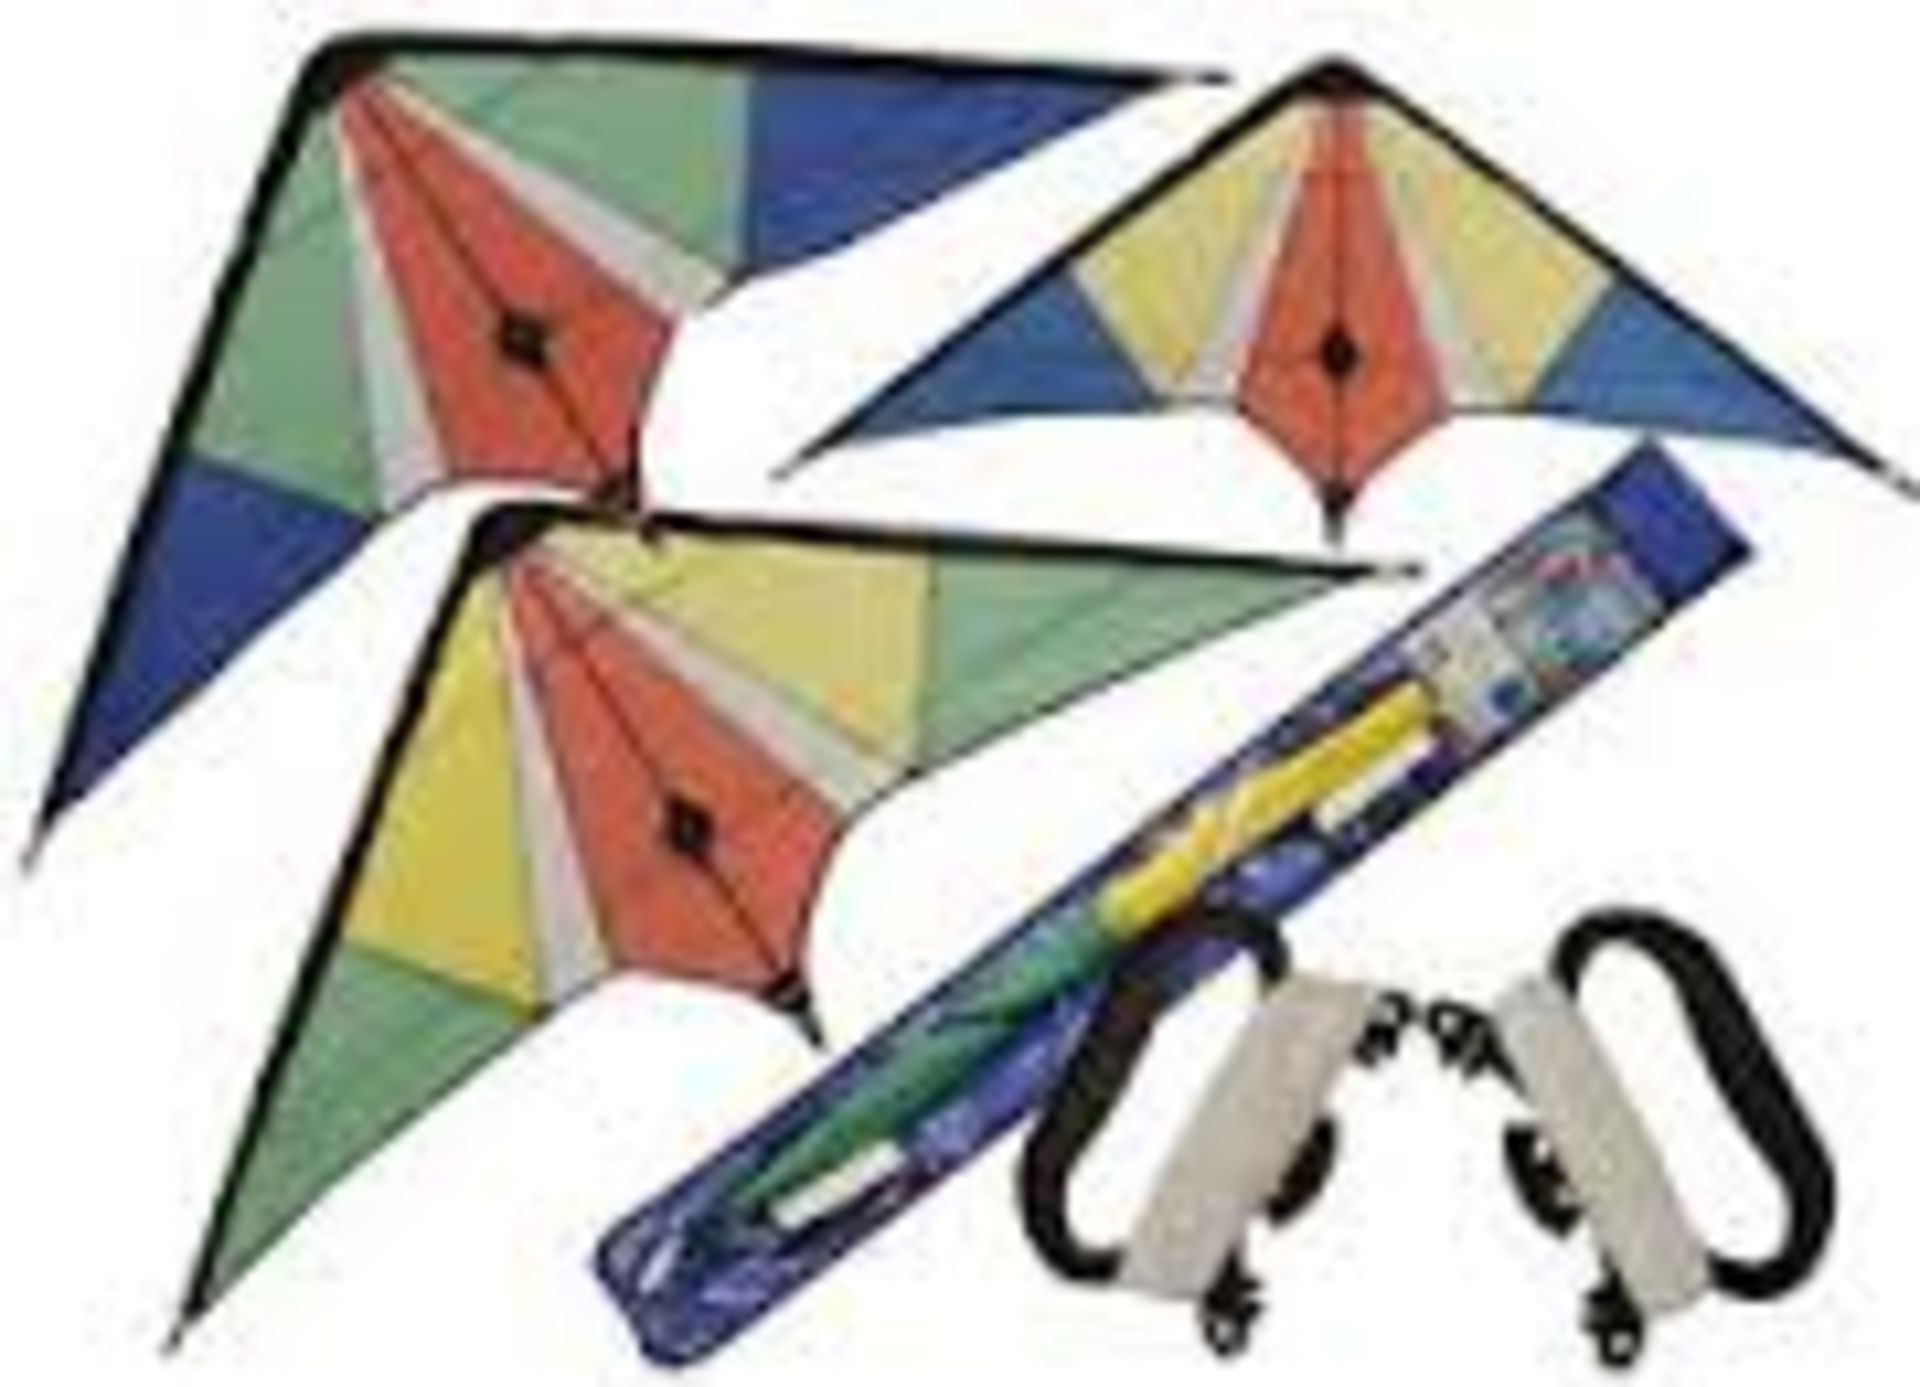 V *TRADE QTY* Brand New Nylon Colourful Delta Kite X 5 YOUR BID PRICE TO BE MULTIPLIED BY FIVE